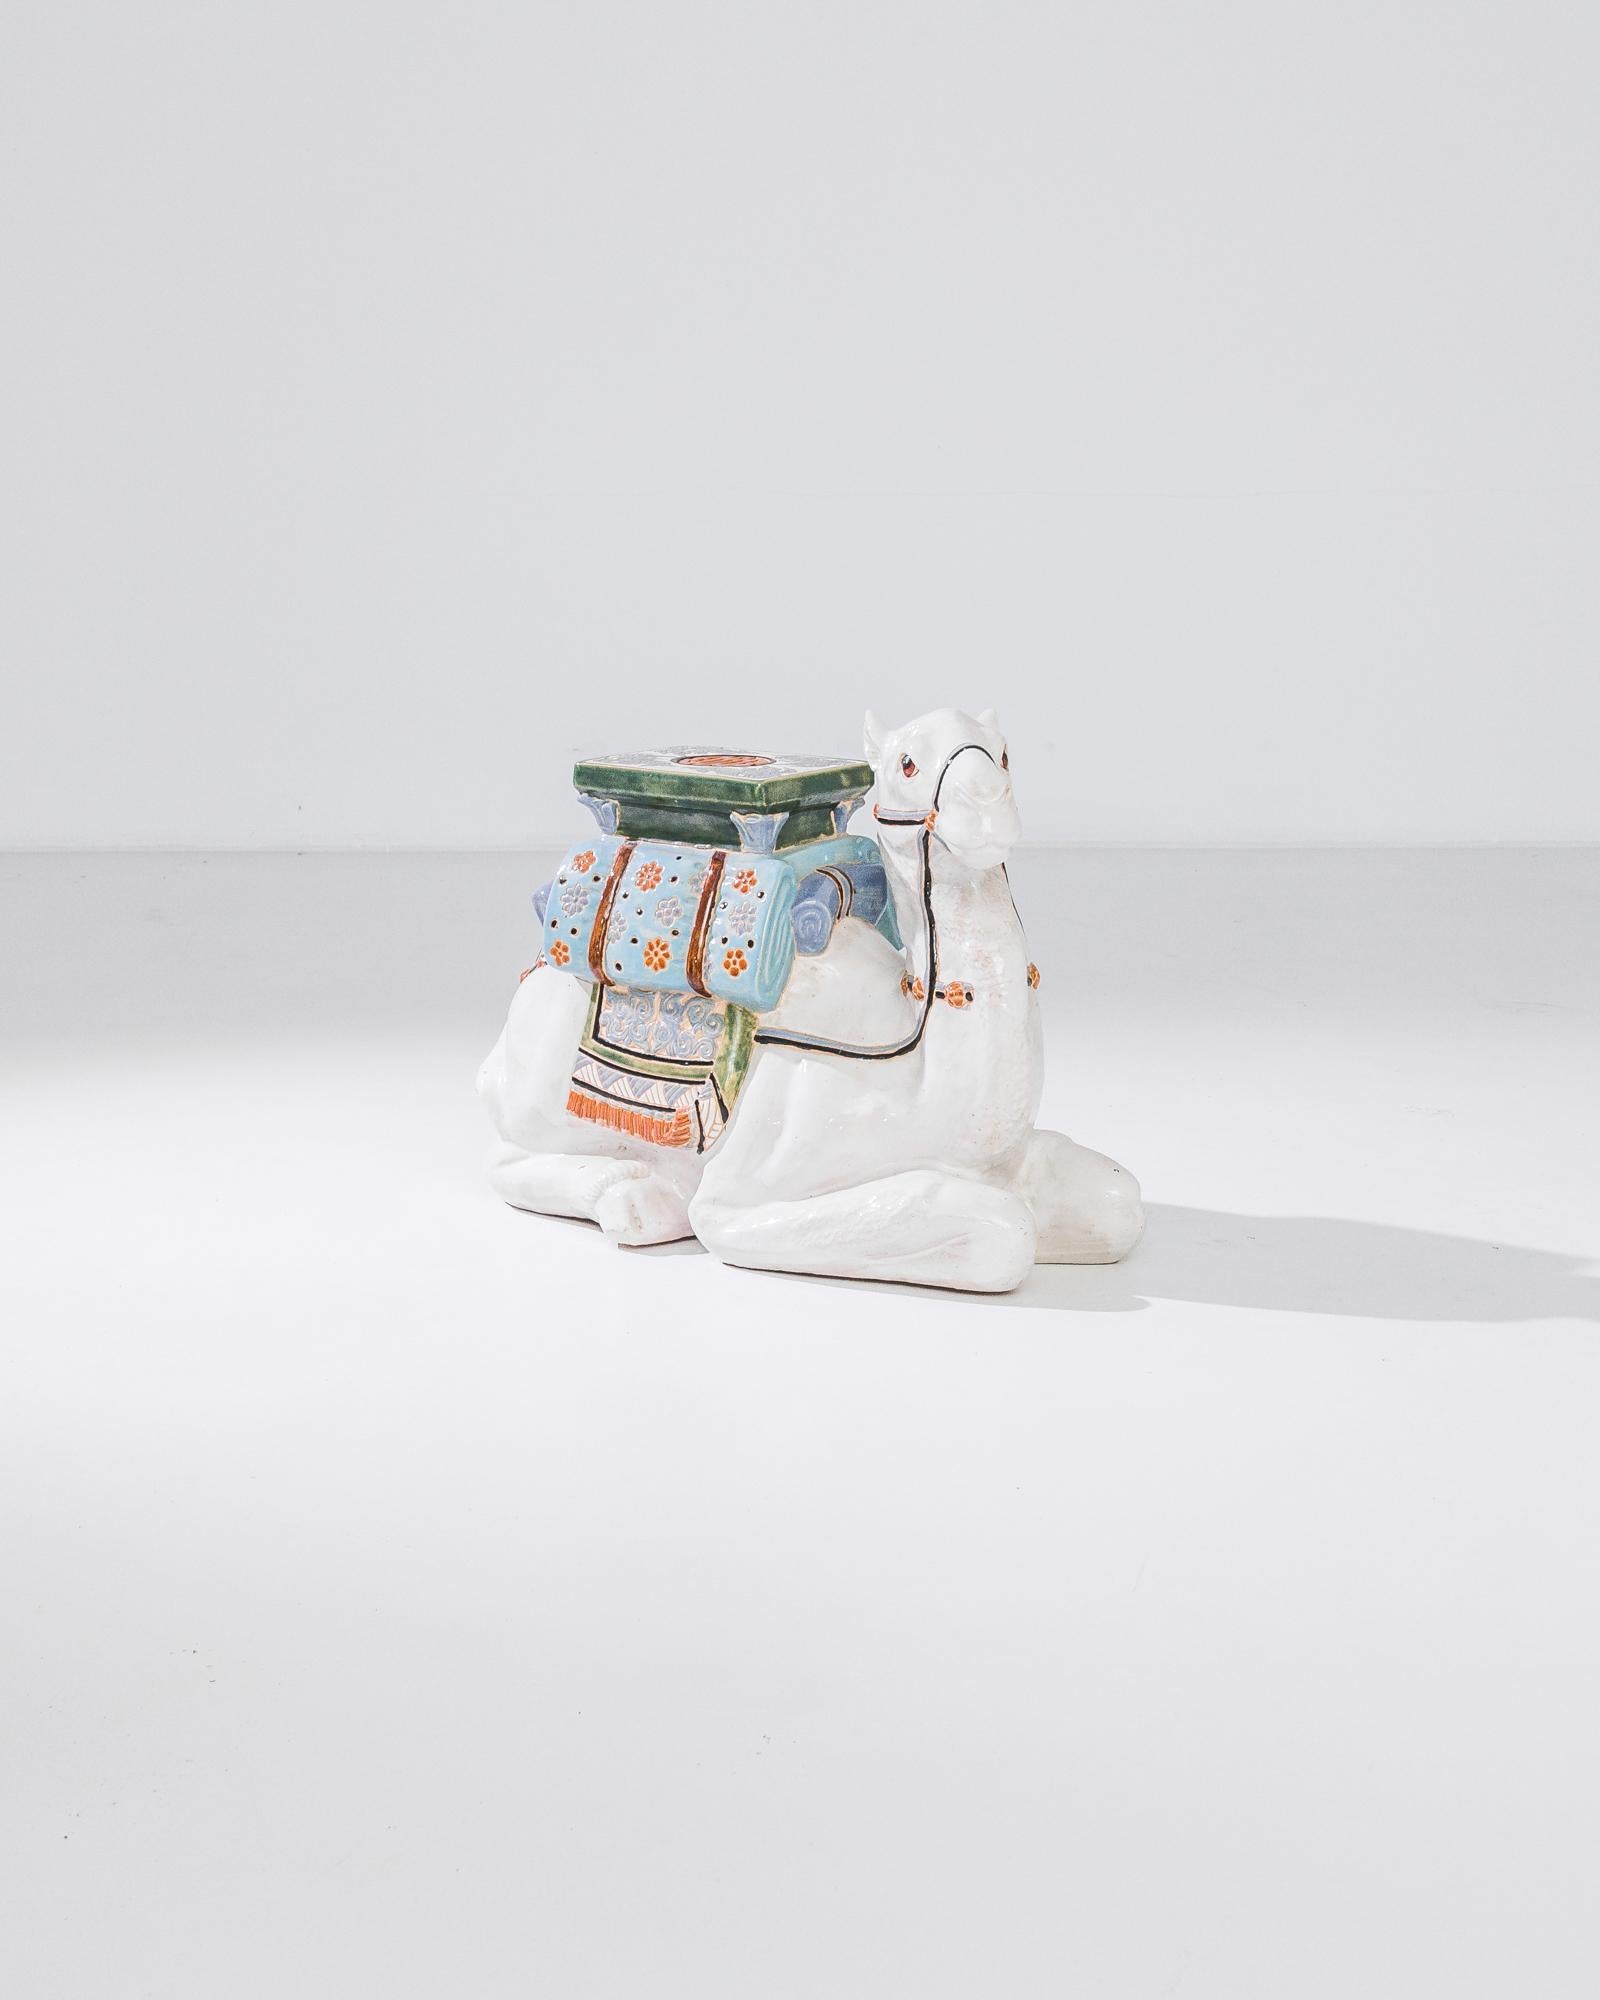 A ceramic decoration from 1960s France in the shape of a white camel. A rug, saddle and saddlebags are glazed with bright colors; the assortment of delicate patterns — reflecting Chinese and Arabic influences — suggest the romance of the Silk Road.